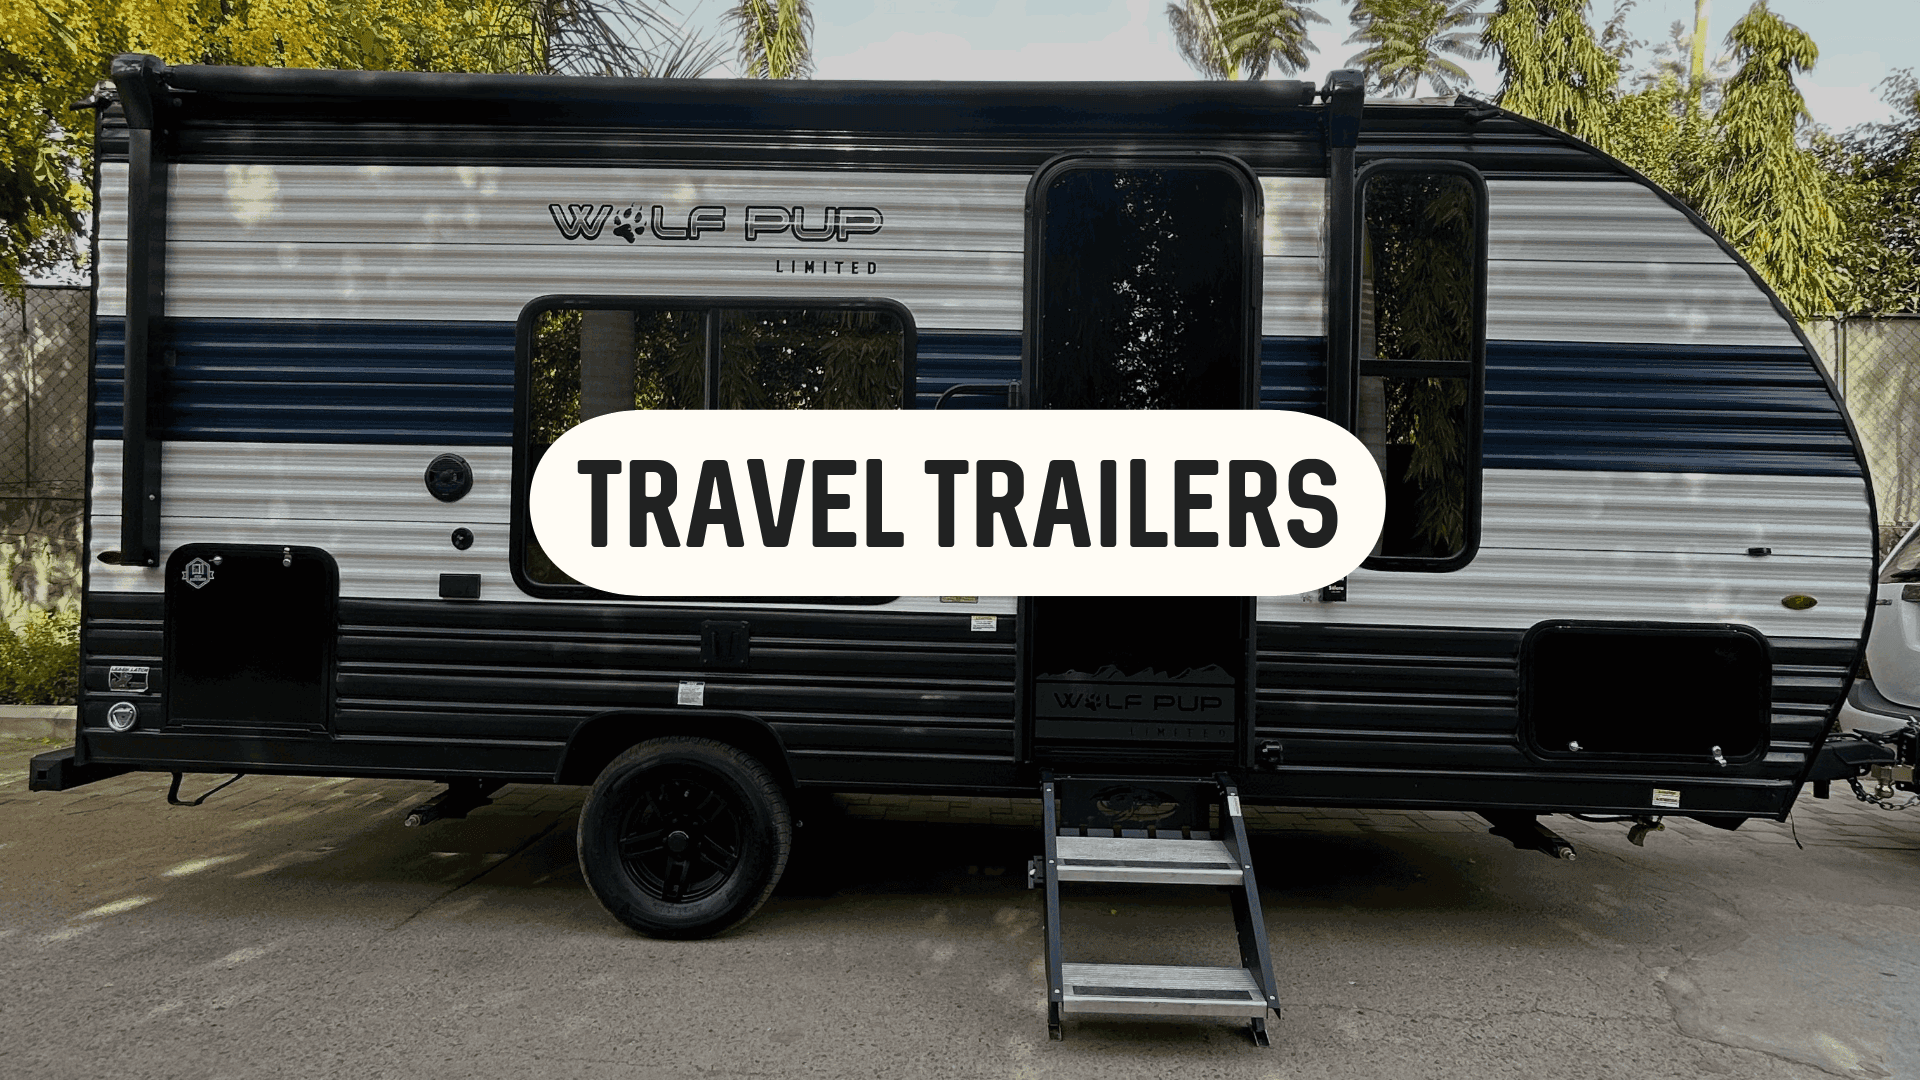 Club Campers - Travel Trailers From Forest River Now In India!